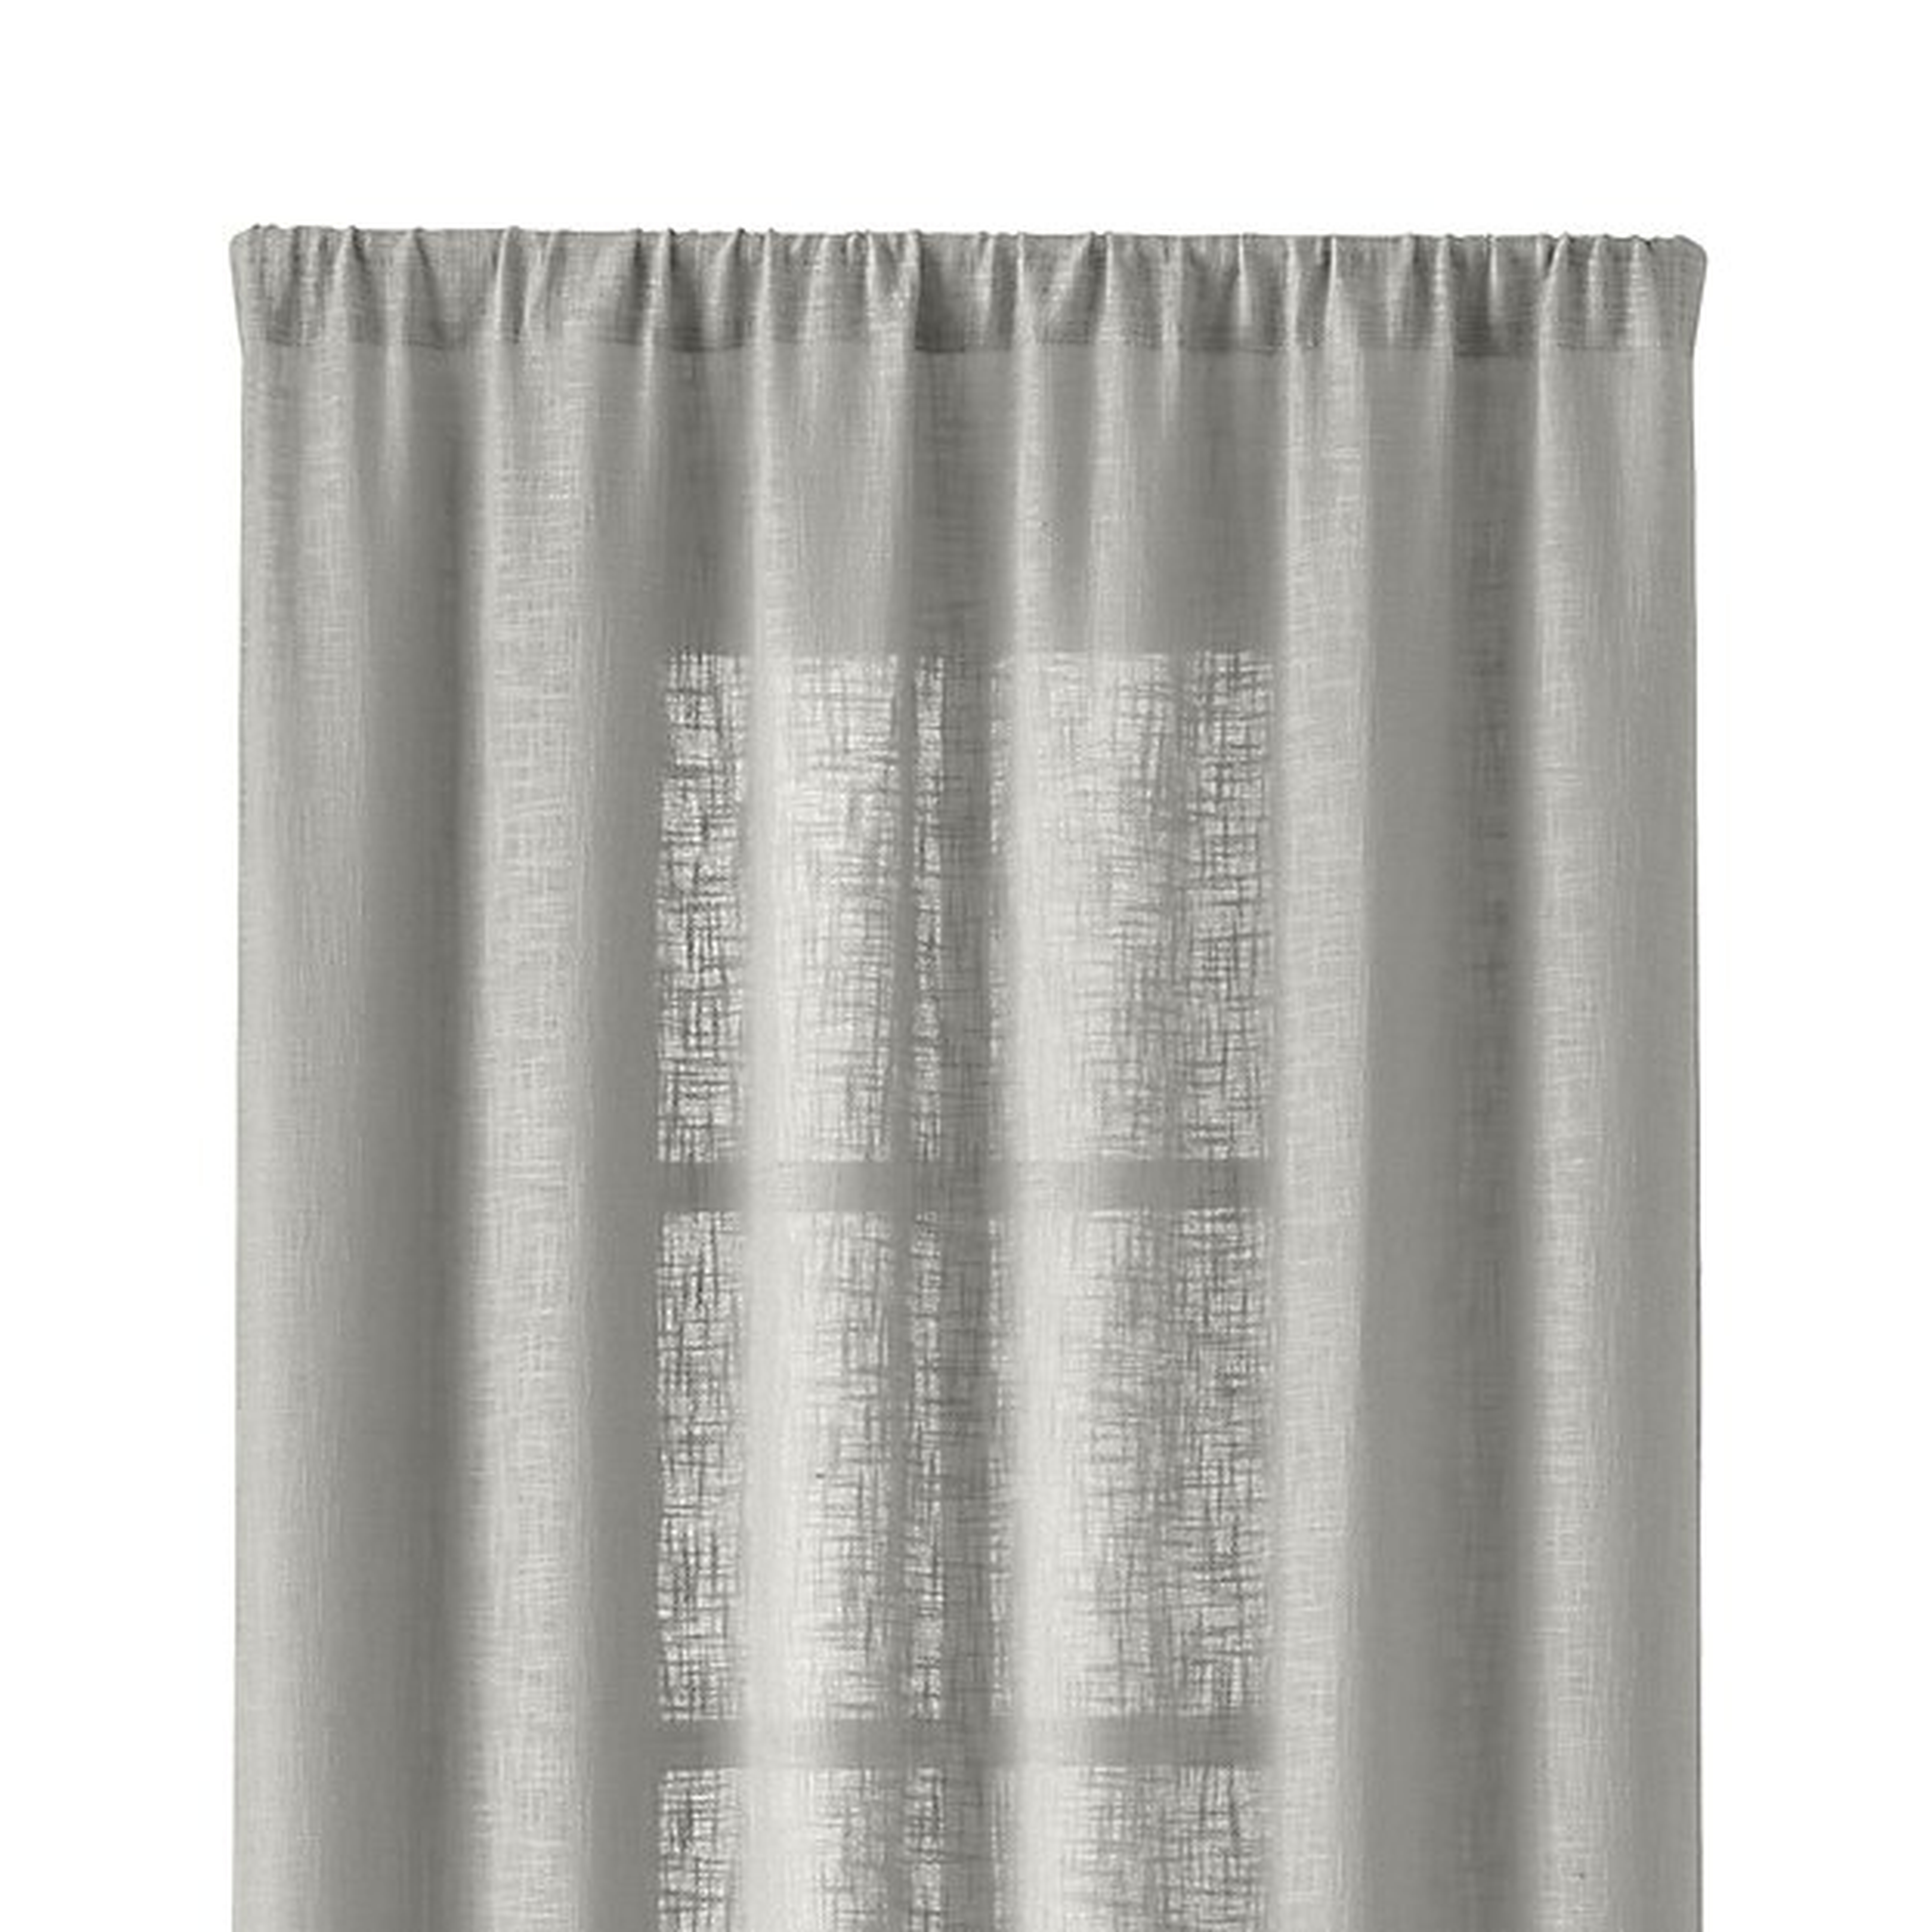 Lindstrom Grey 48"x96" Curtain Panel - Crate and Barrel